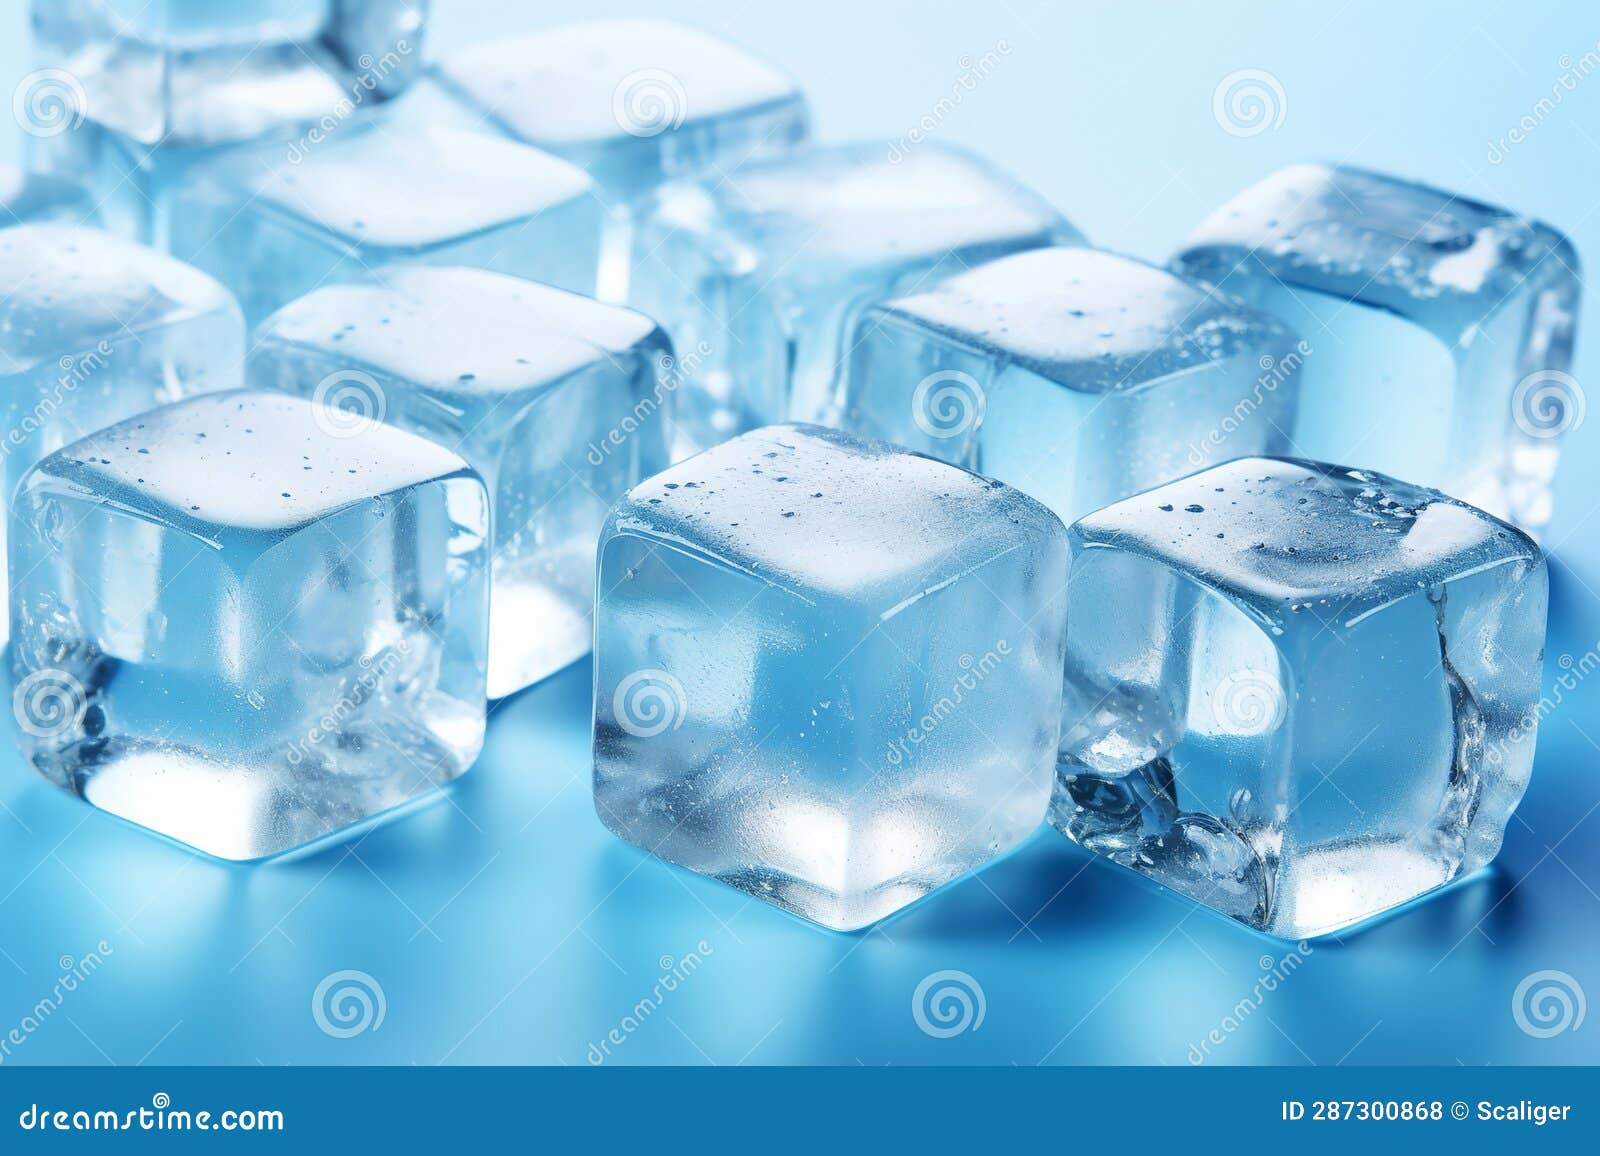 sparkling ice cubes background, pattern of crystal frozen icecubes